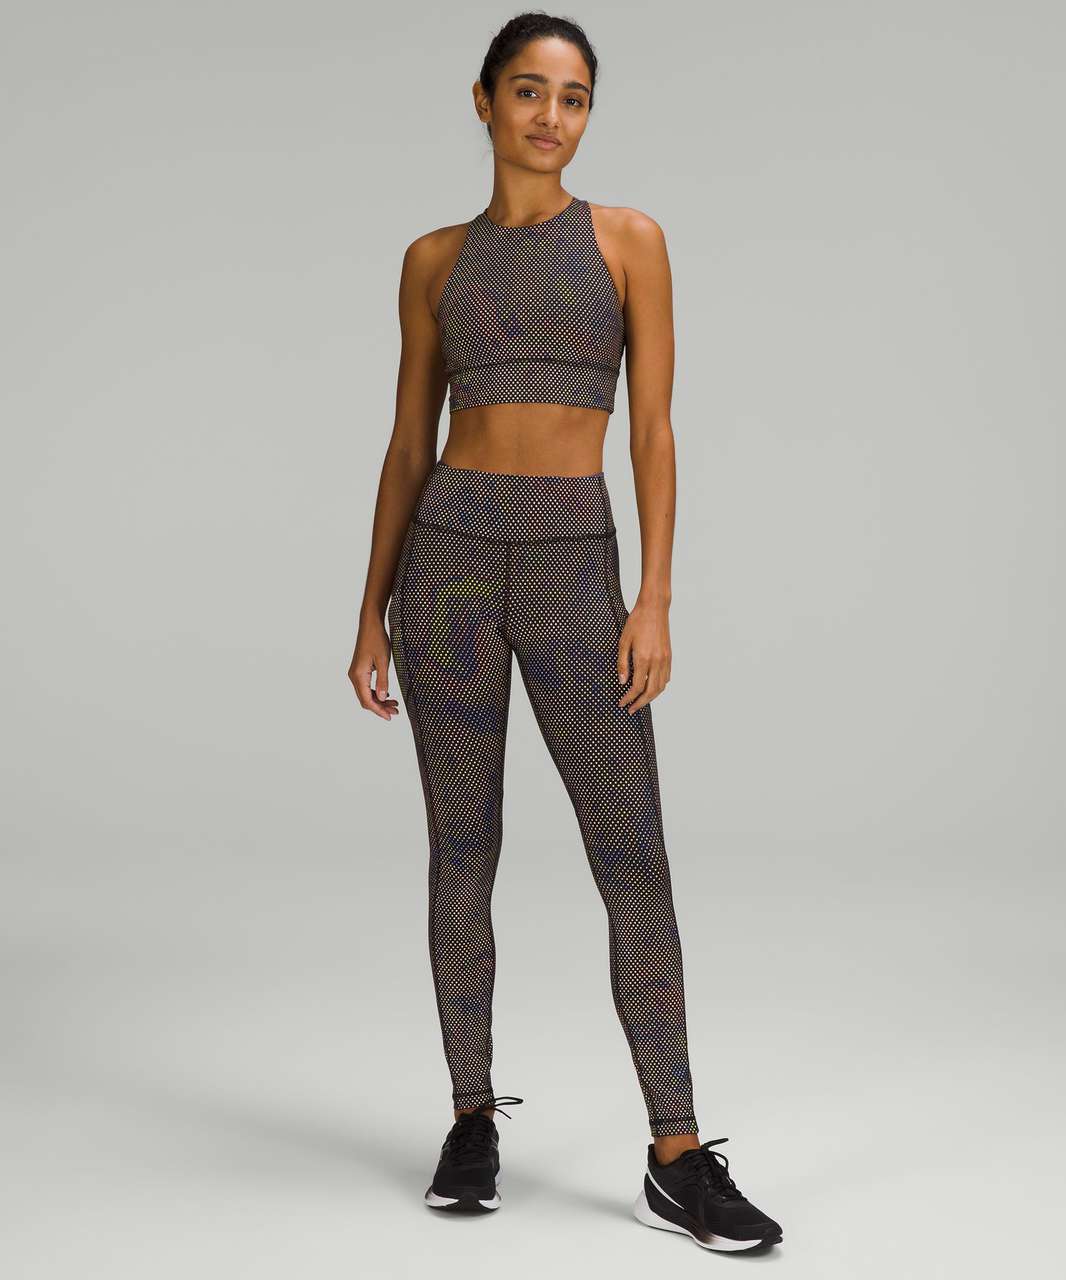 Lululemon Limited Edition Swift Speed Mid-Rise Reflective Tight 28" - Anticipation Reflective Silver Multi